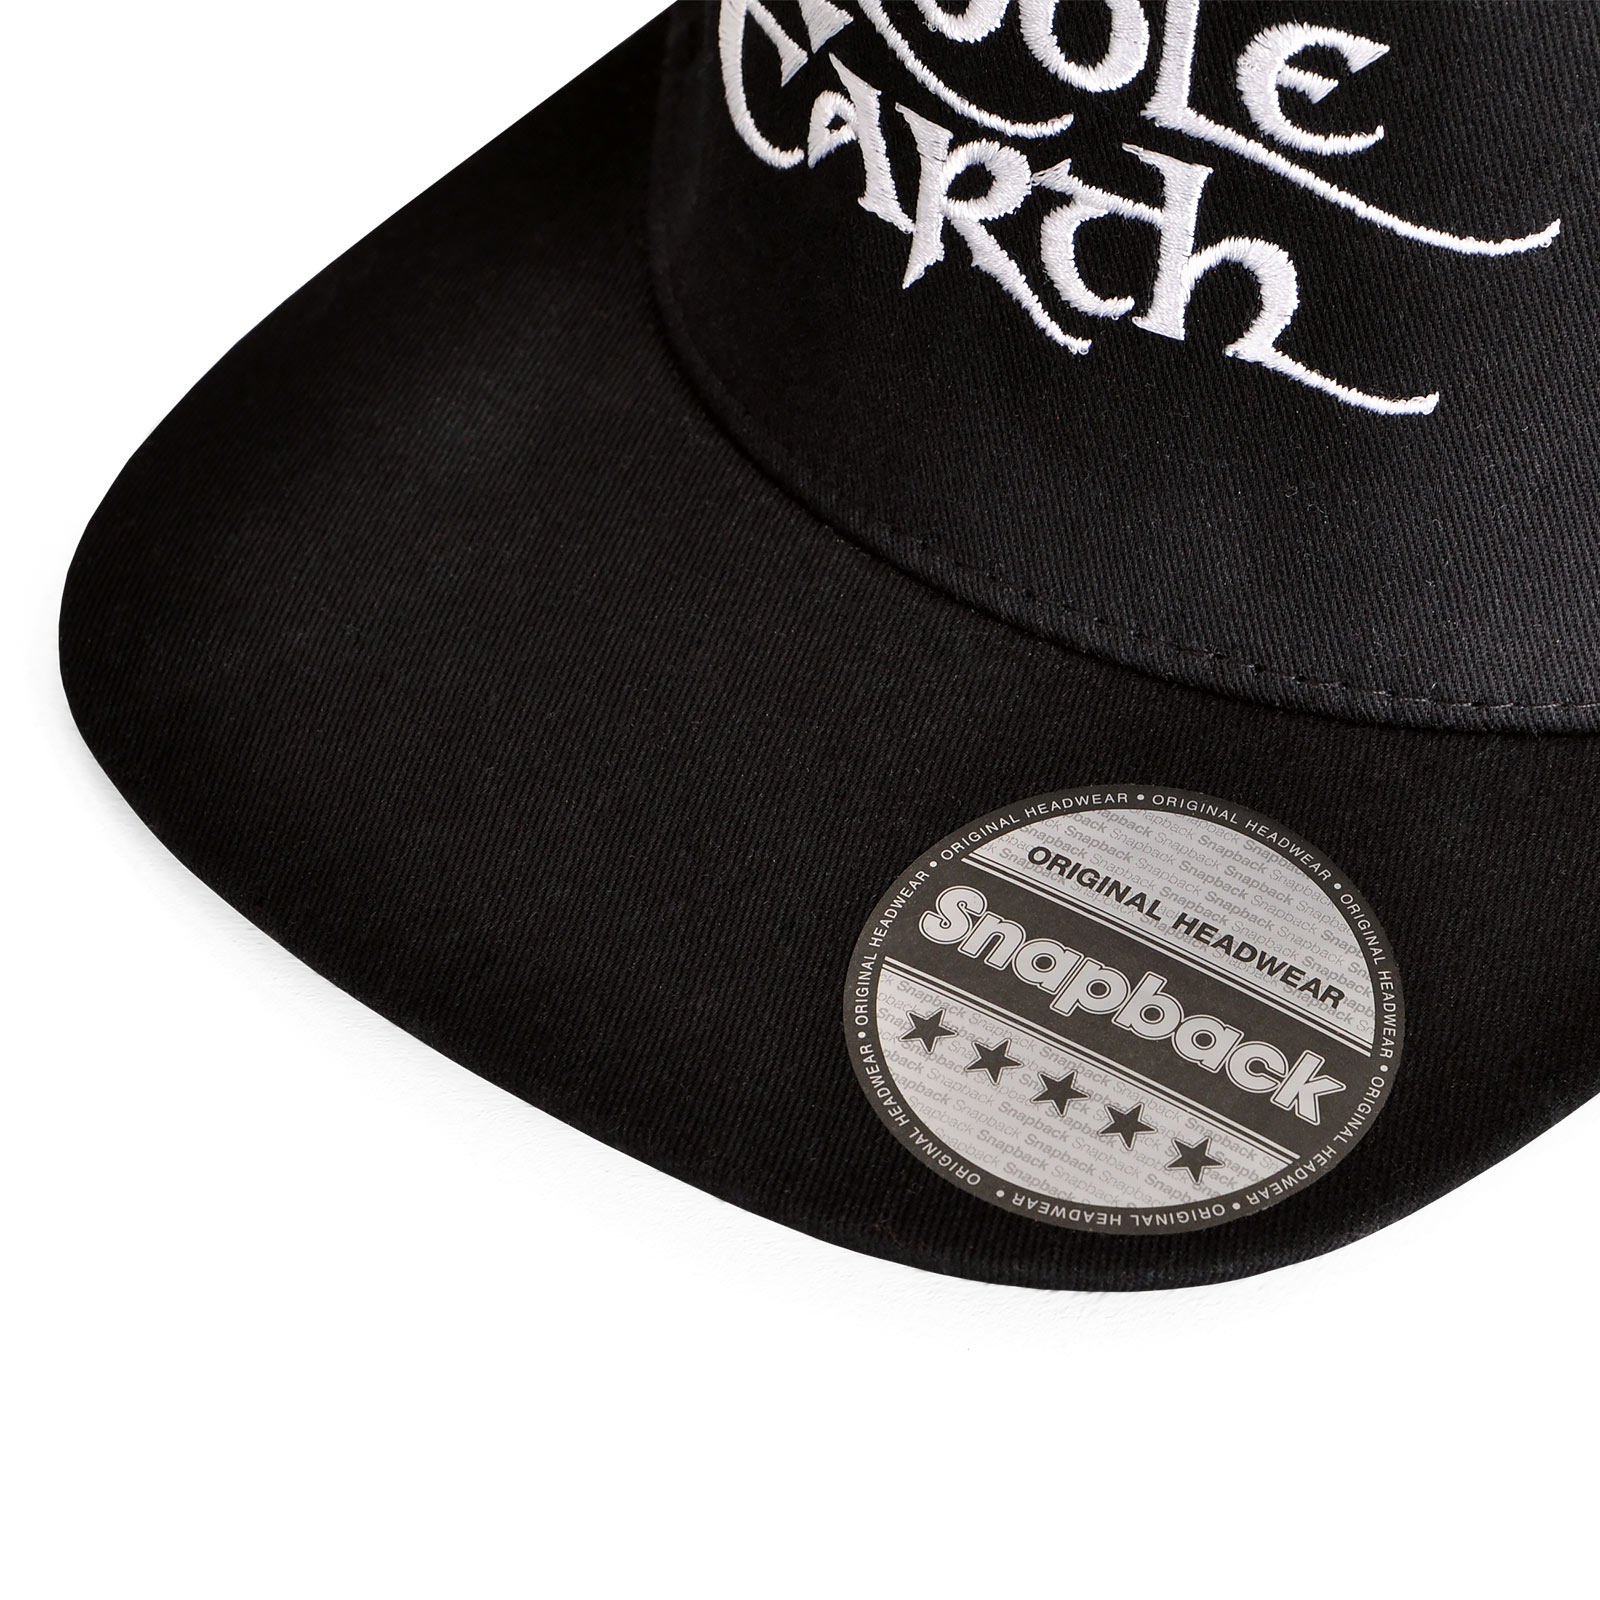 Lord of the Rings - Middle Earth Snapback Cap Black